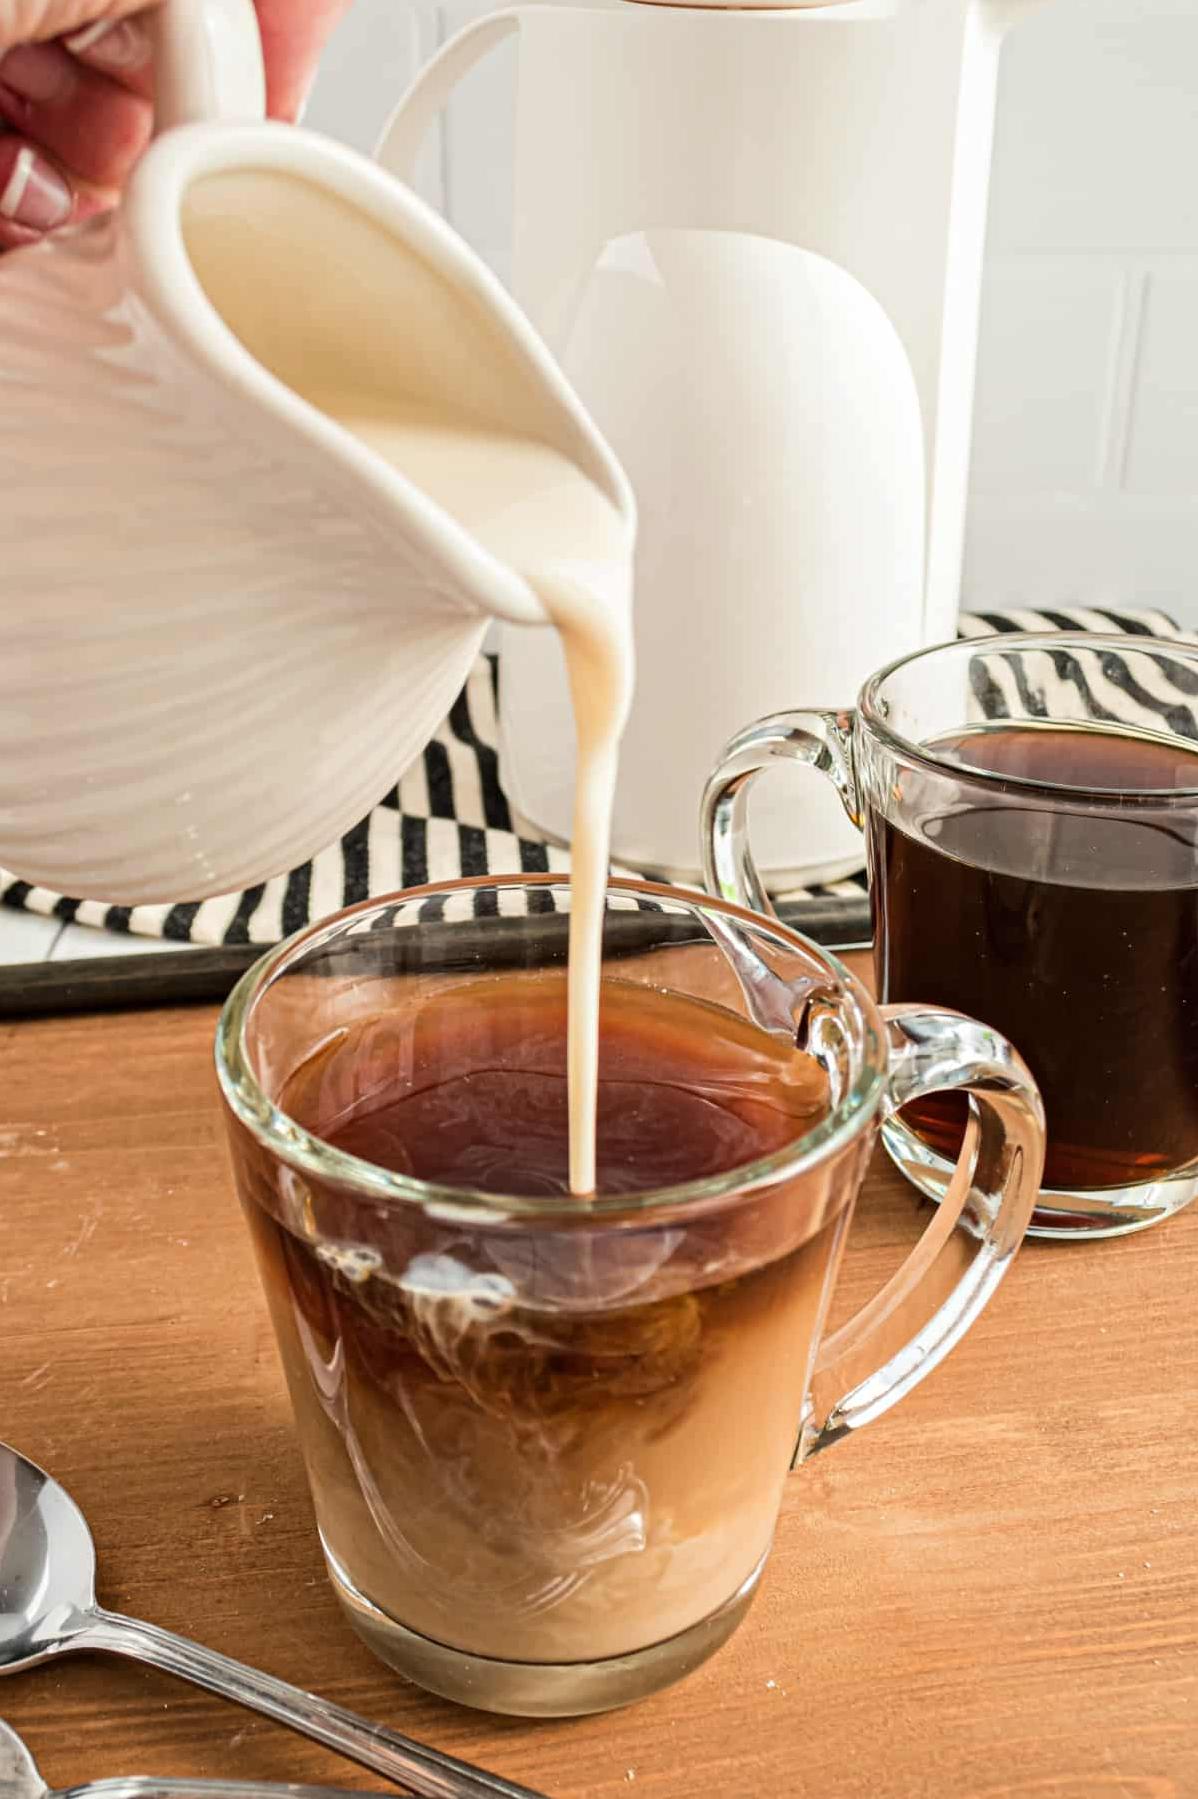  Satisfy your caffeine cravings with a homemade touch of flavor.